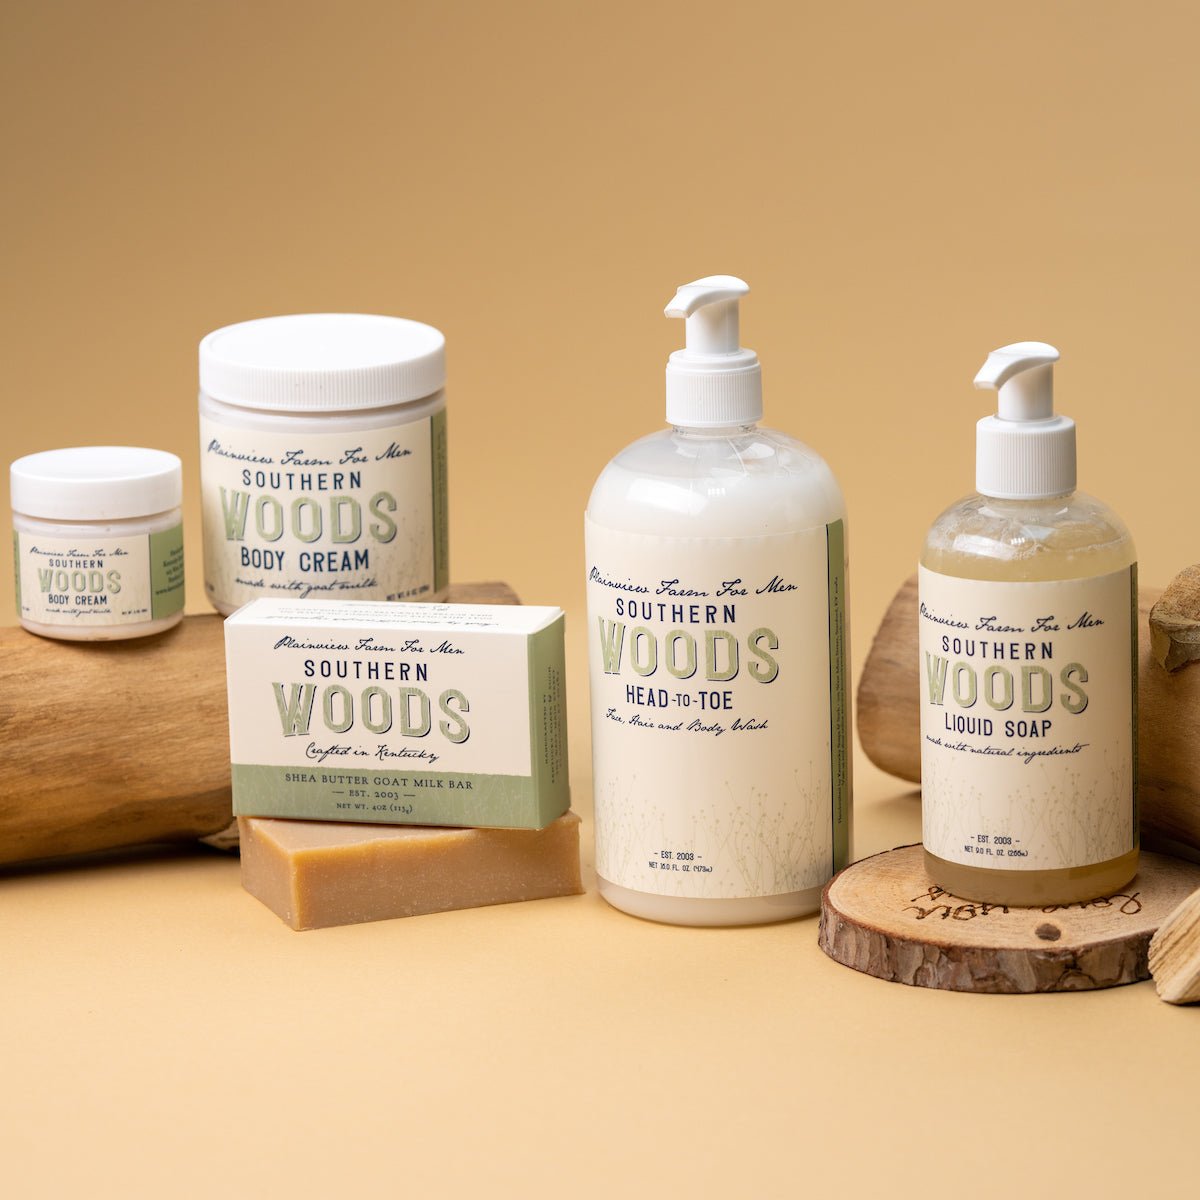 Southern Woods All Natural Body Cream - Kentucky Soaps & Such